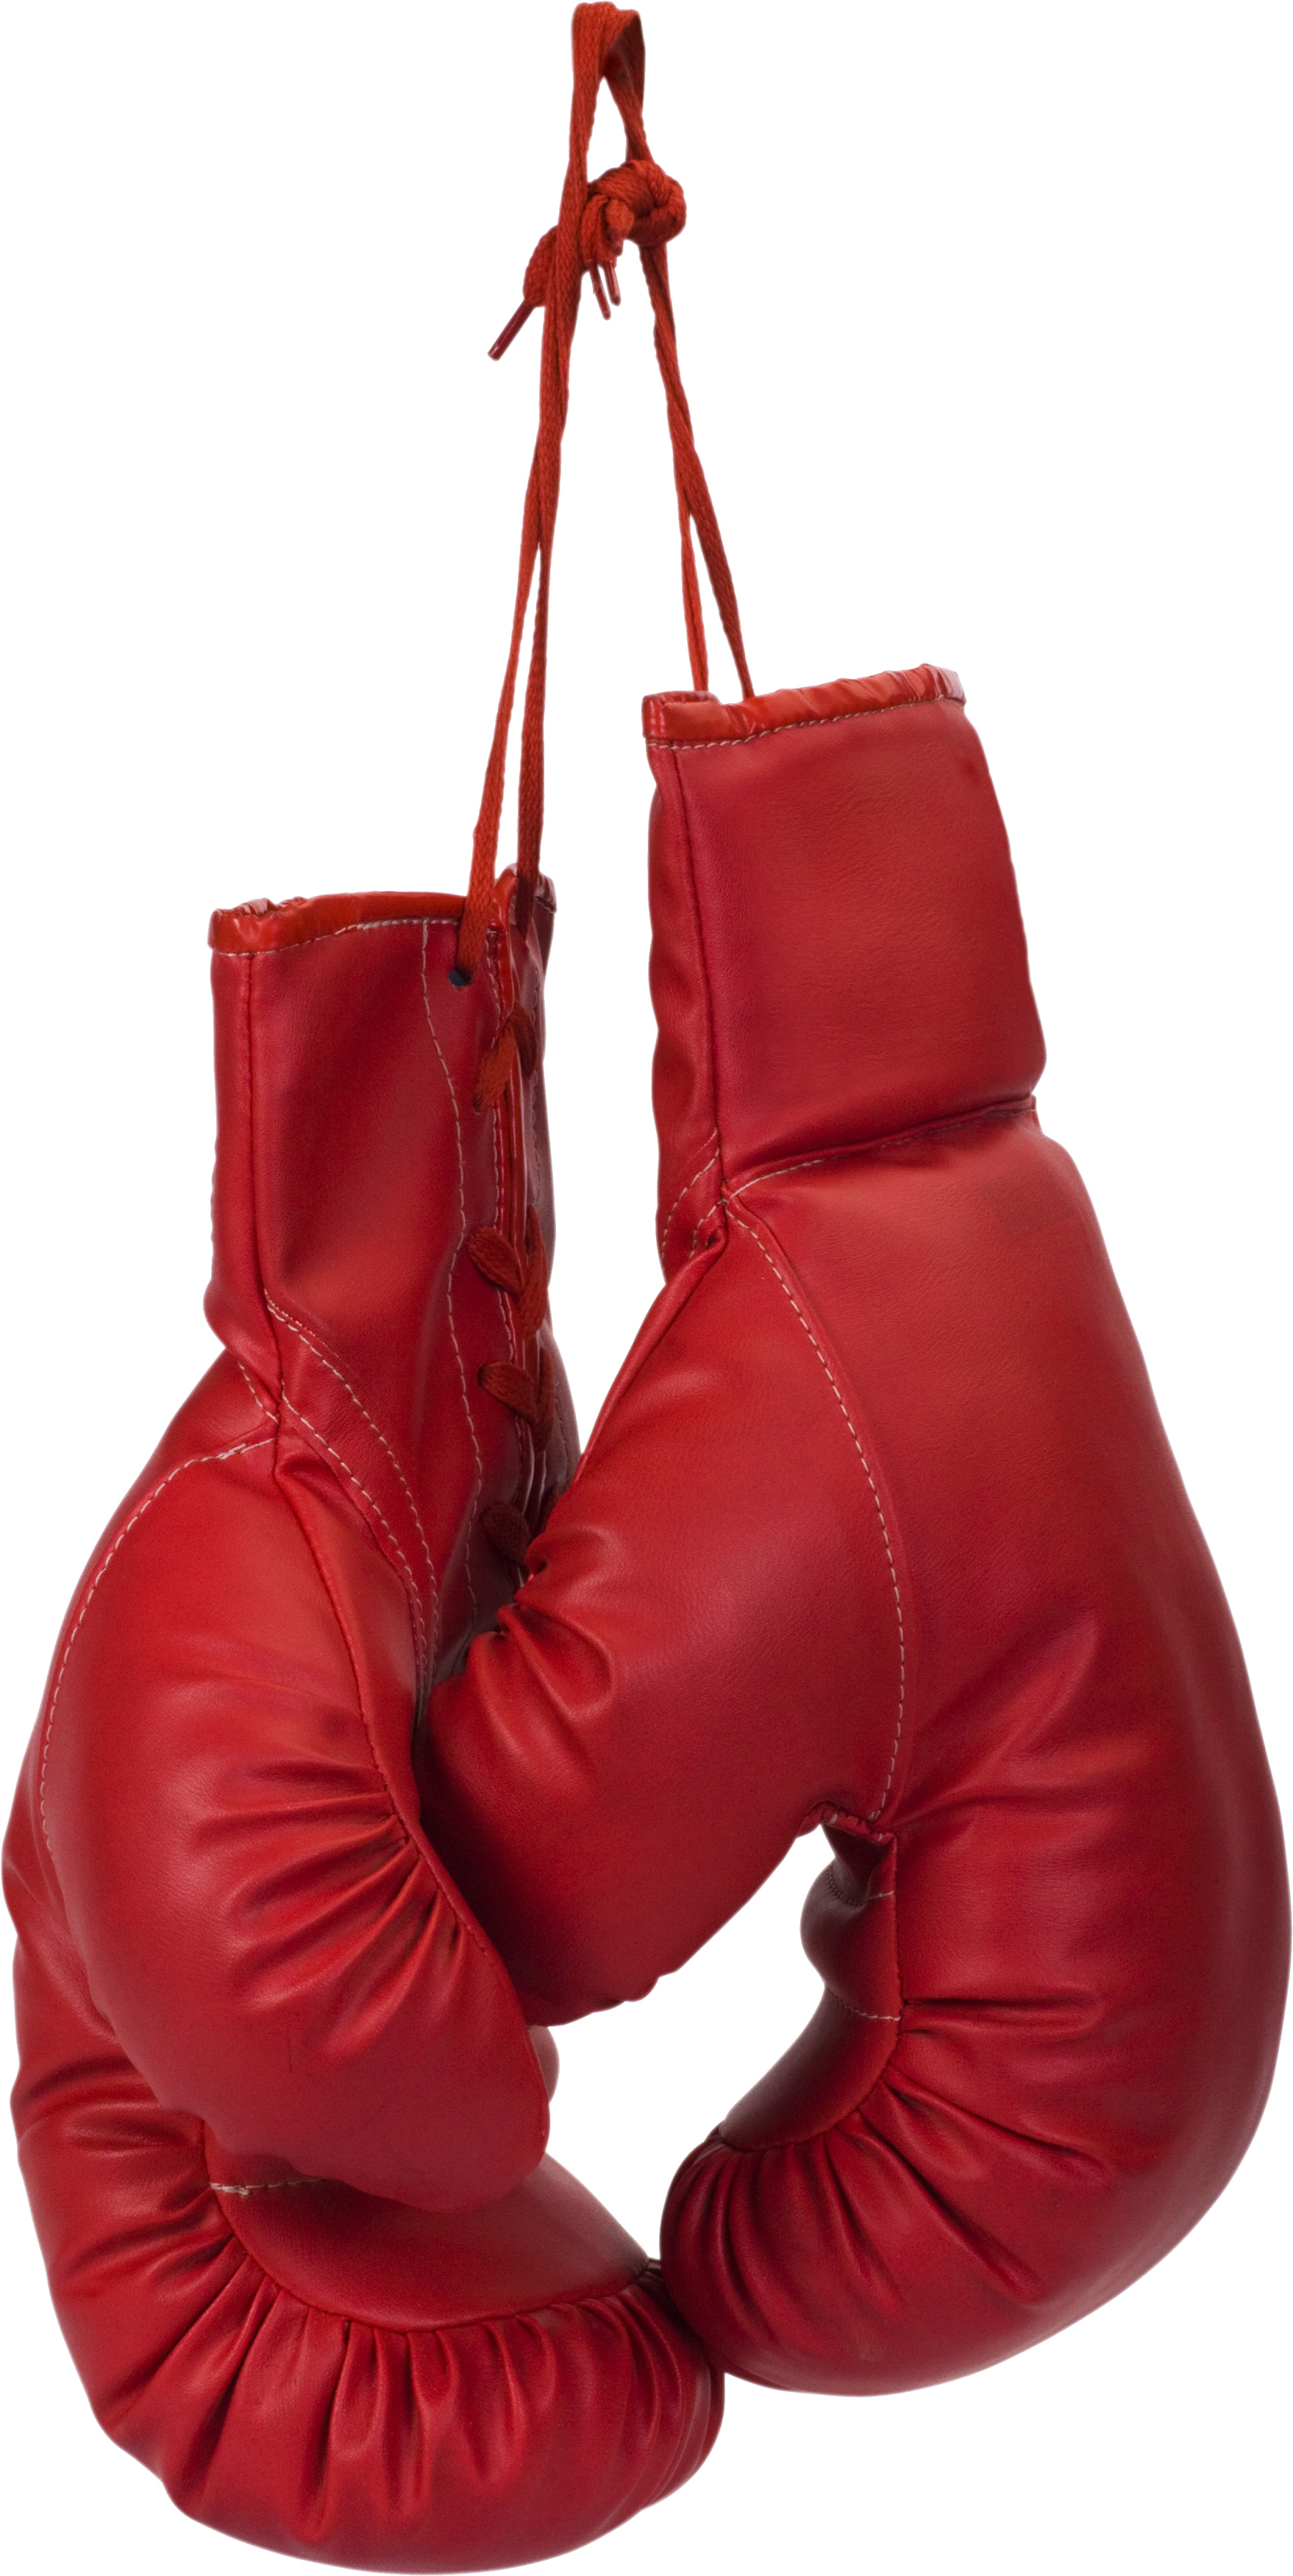 Hanging boxing gloves, Boxing sports equipment, Adrenaline-filled sport, Boxing memories, 1760x3510 HD Handy